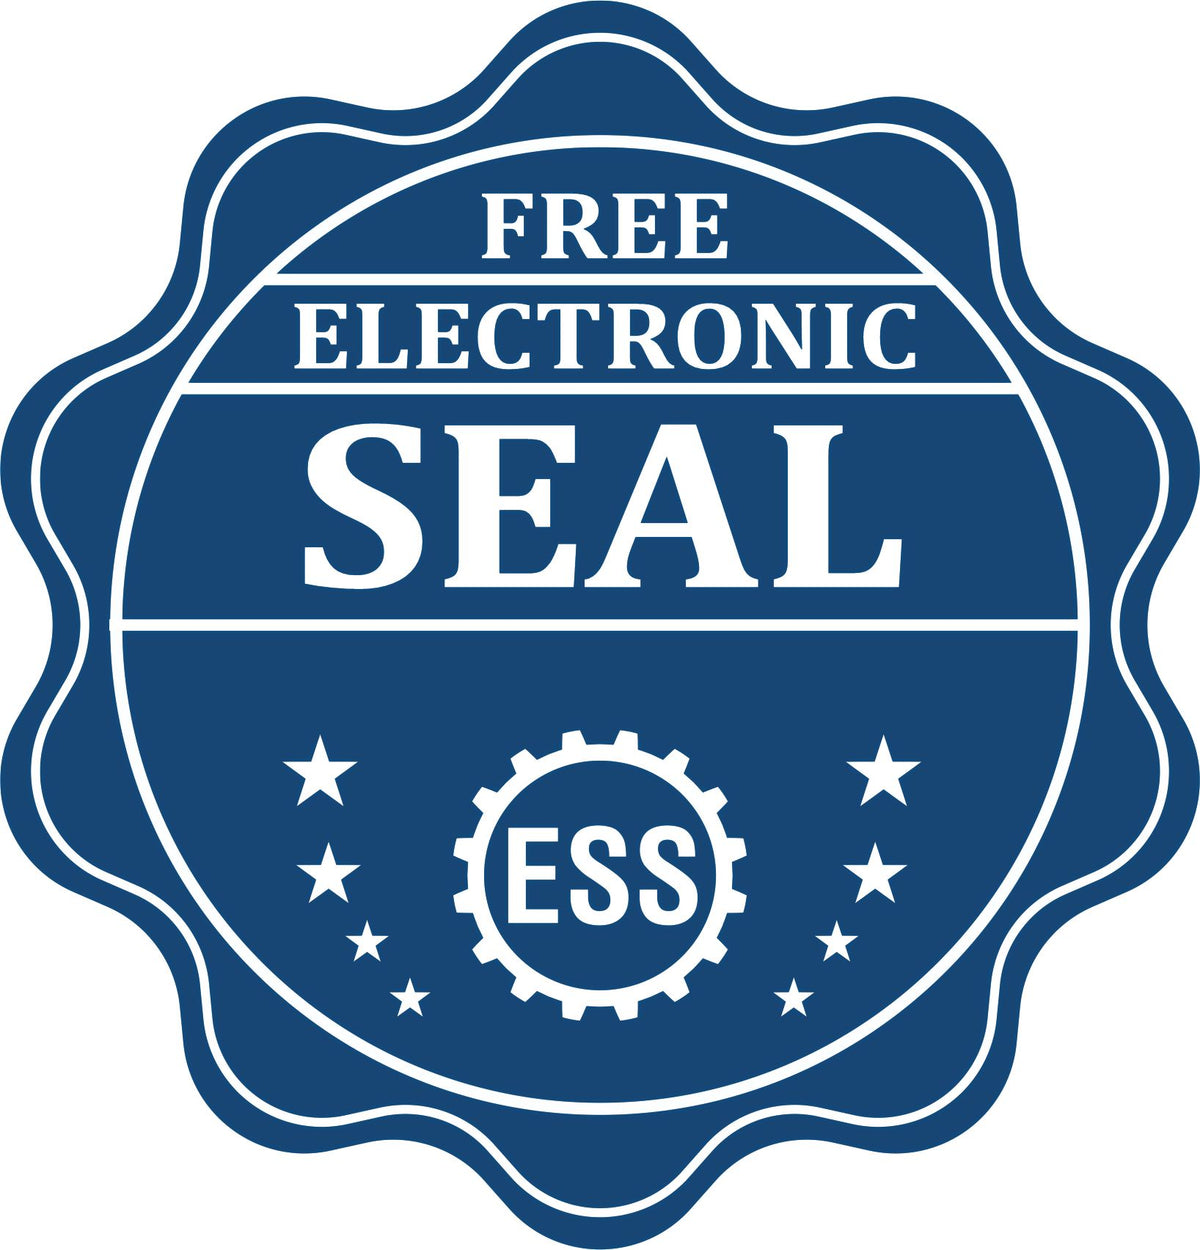 A badge showing a free electronic seal for the Slim Pre-Inked New Mexico Land Surveyor Seal Stamp with stars and the ESS gear on the emblem.